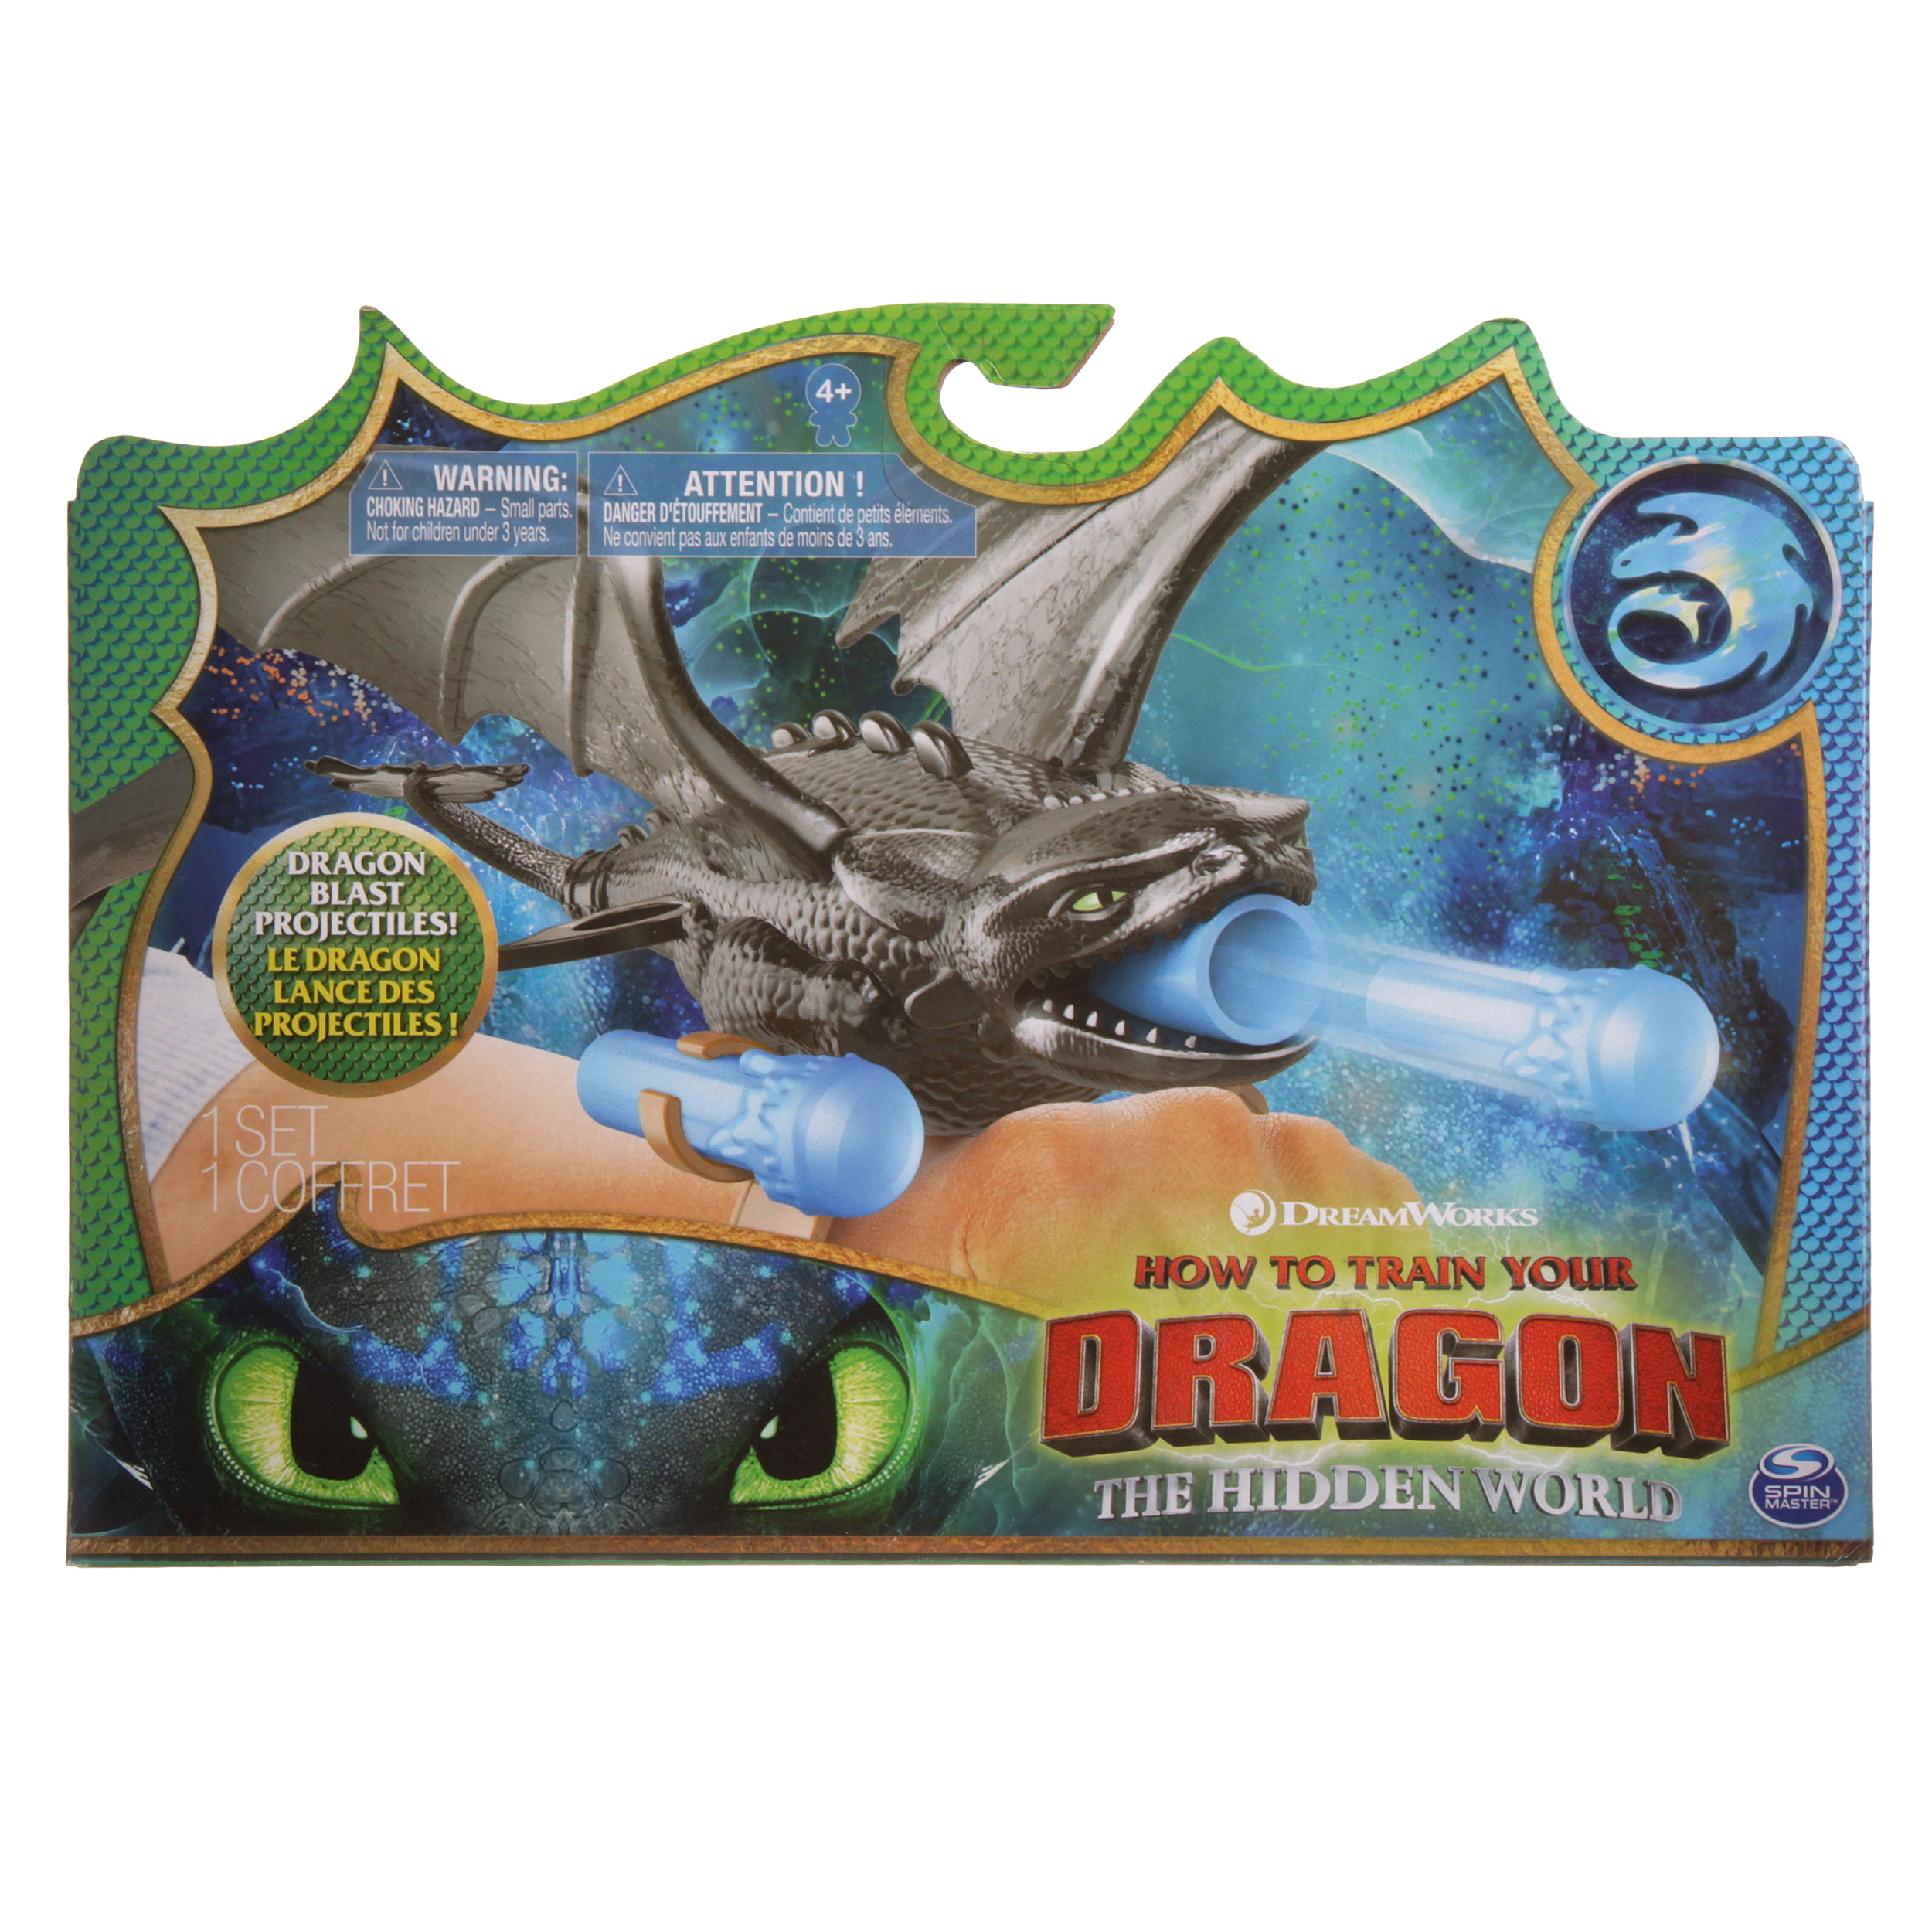 DreamWorks Dragons Toothless Wrist Launcher, Role-Play Launcher Accessory, for Kids Aged 4 and up - image 2 of 3